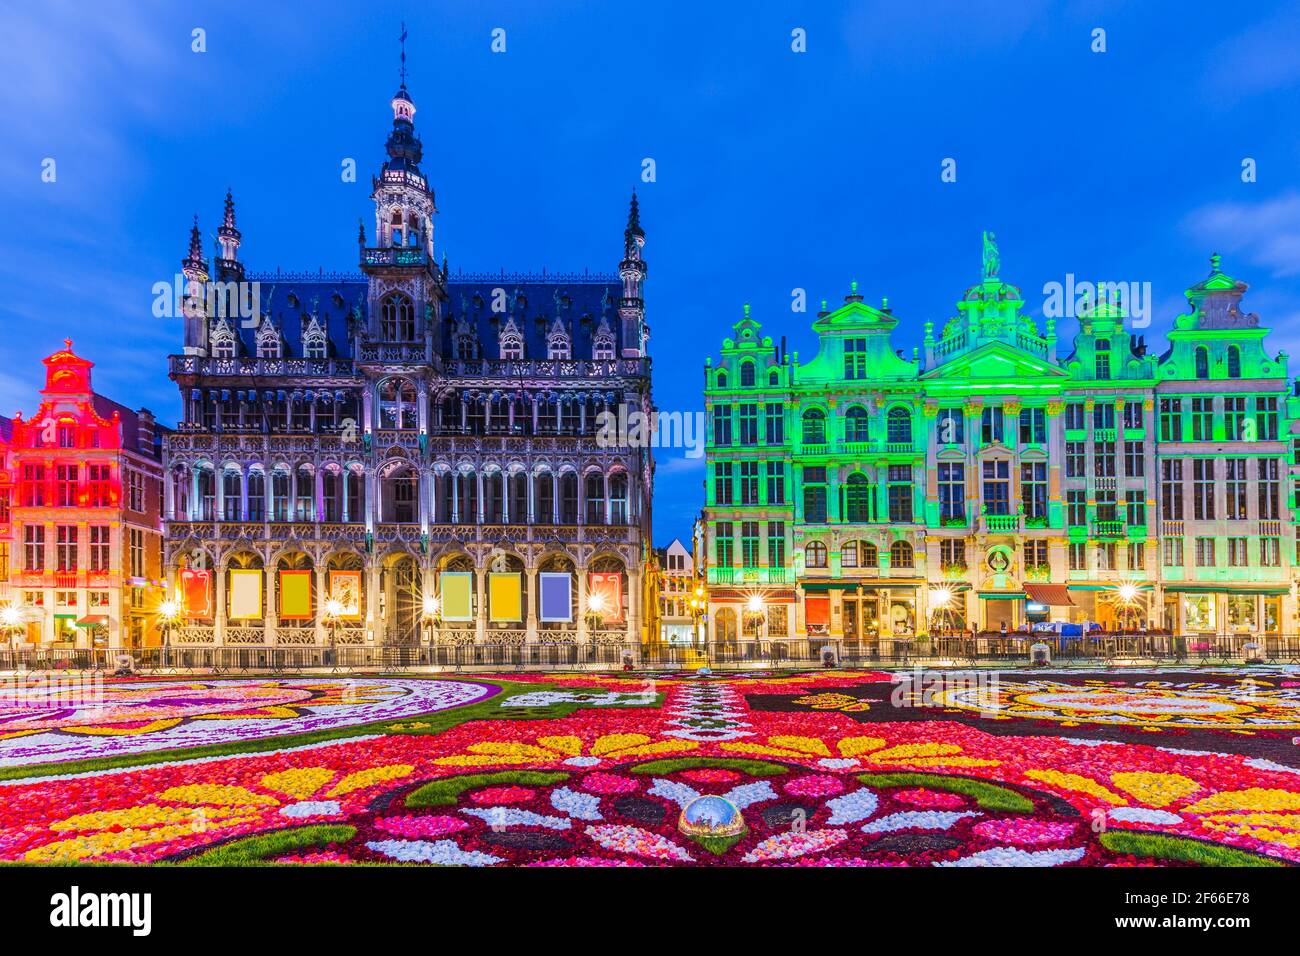 Brussels, Belgium - August 17, 2018: Grand Place during Flower Carpet festival. This year theme was Mexico. Stock Photo